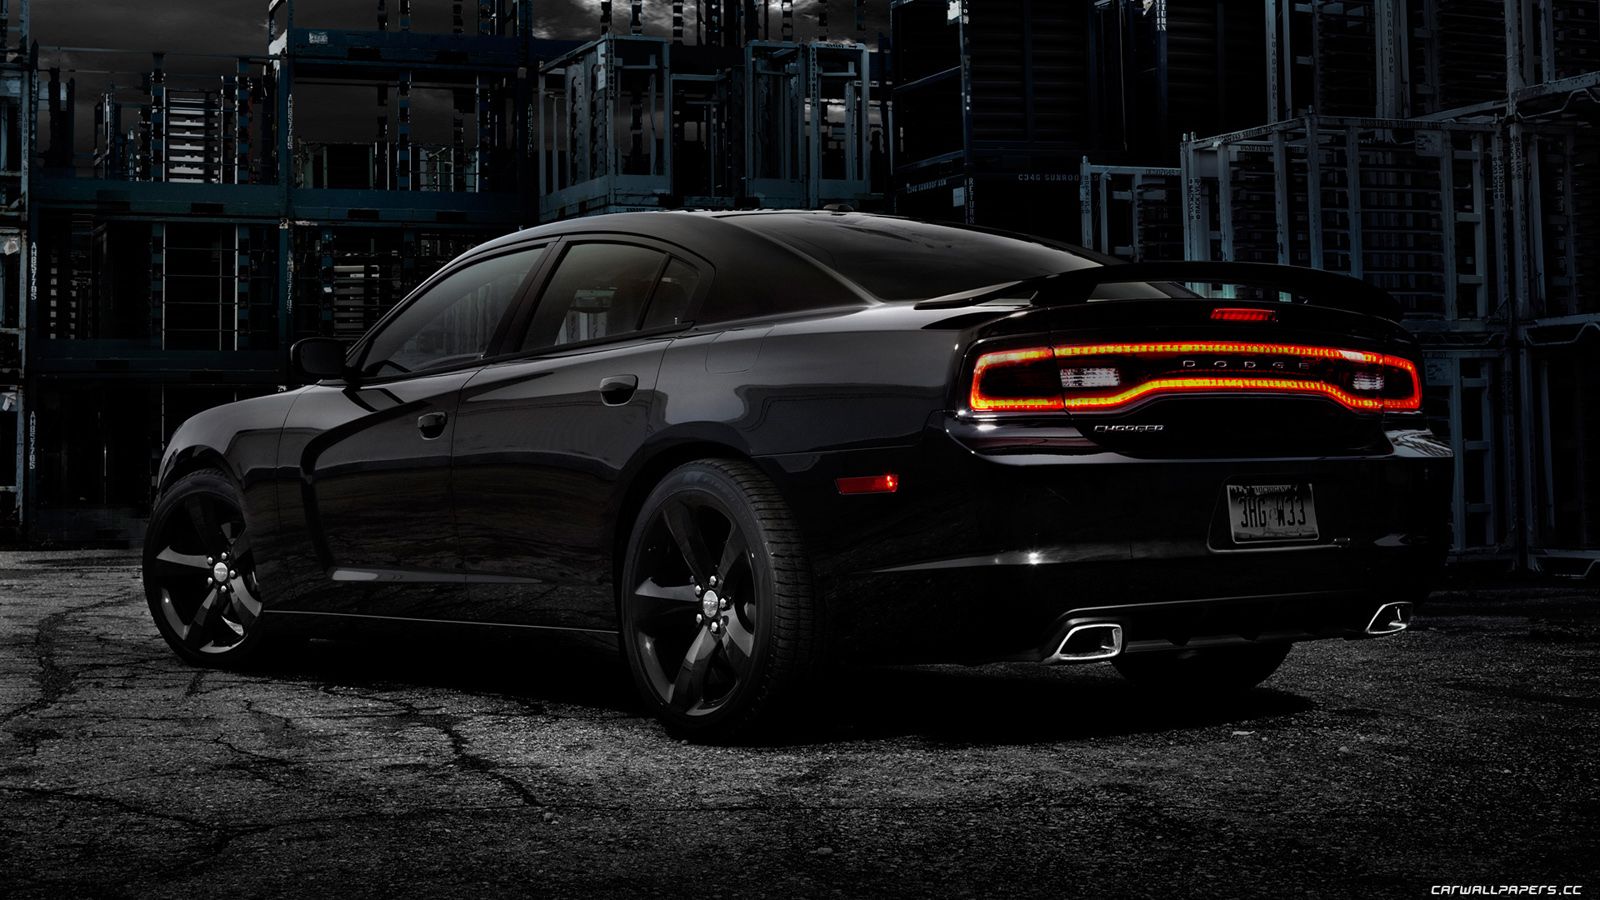 Charger Wallpaper. Dodge Charger Tron Legacy Wallpaper, Charger Wallpaper and Turbocharger Wallpaper